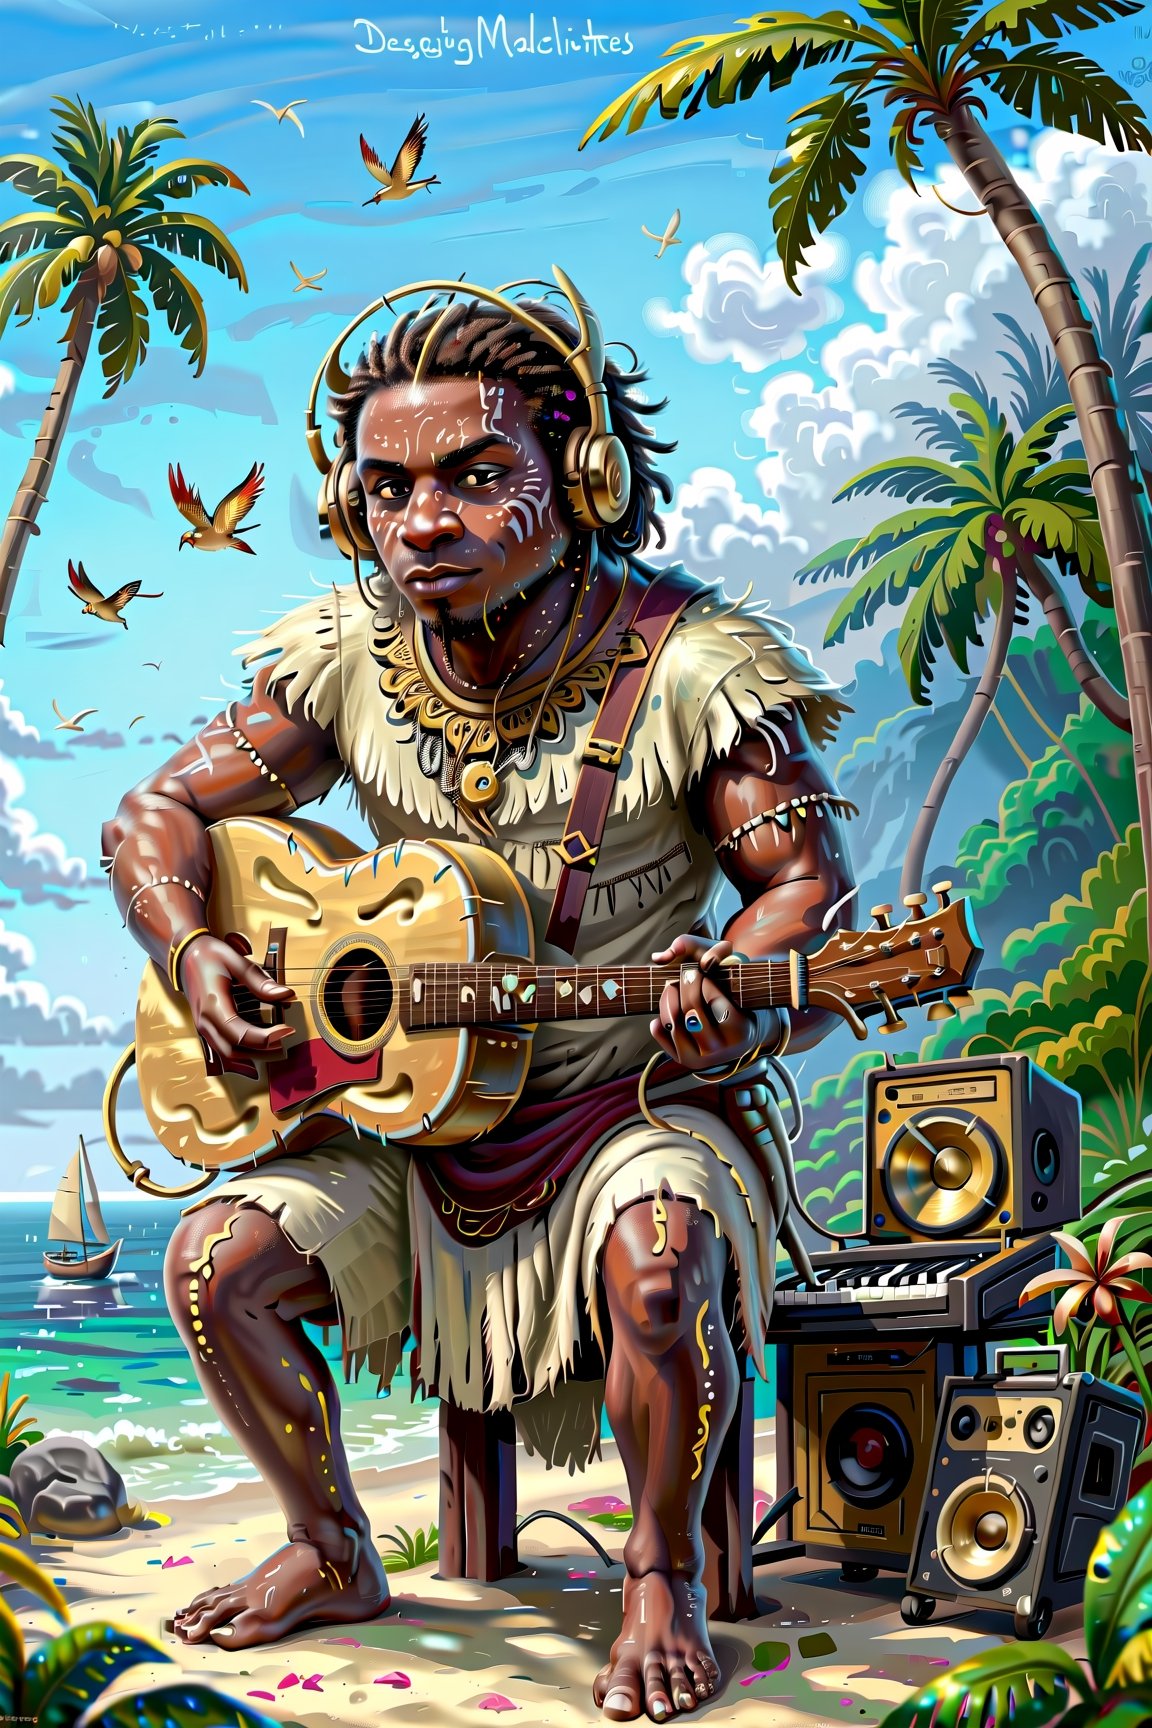 Craft a stable diffusion prompt centered around an African American music producer in a serene coastal setting. Imagine a male musician surrounded by electronic music production equipment, instruments, and gear outdoors, against the backdrop of a beach with coconut trees. Highlight the positivity radiating from the artist and emphasize his short hair and rich, dark skin tone. Encourage the portrayal of a scene where this talented African American musician is deeply engaged in the creative process, expressing his love for music within the beauty of the natural surroundings.






Craft a stable diffusion prompt centered around an African American music producer in a serene coastal setting. Imagine a male musician surrounded by electronic music production equipment, instruments, and gear outdoors, against the backdrop of a beach with coconut trees. Highlight the positivity radiating from the artist and emphasize his short hair and rich, dark skin tone. Encourage the portrayal of a scene where this talented African American musician is deeply engaged in the creative process, expressing his love for music within the beauty of the natural surroundings